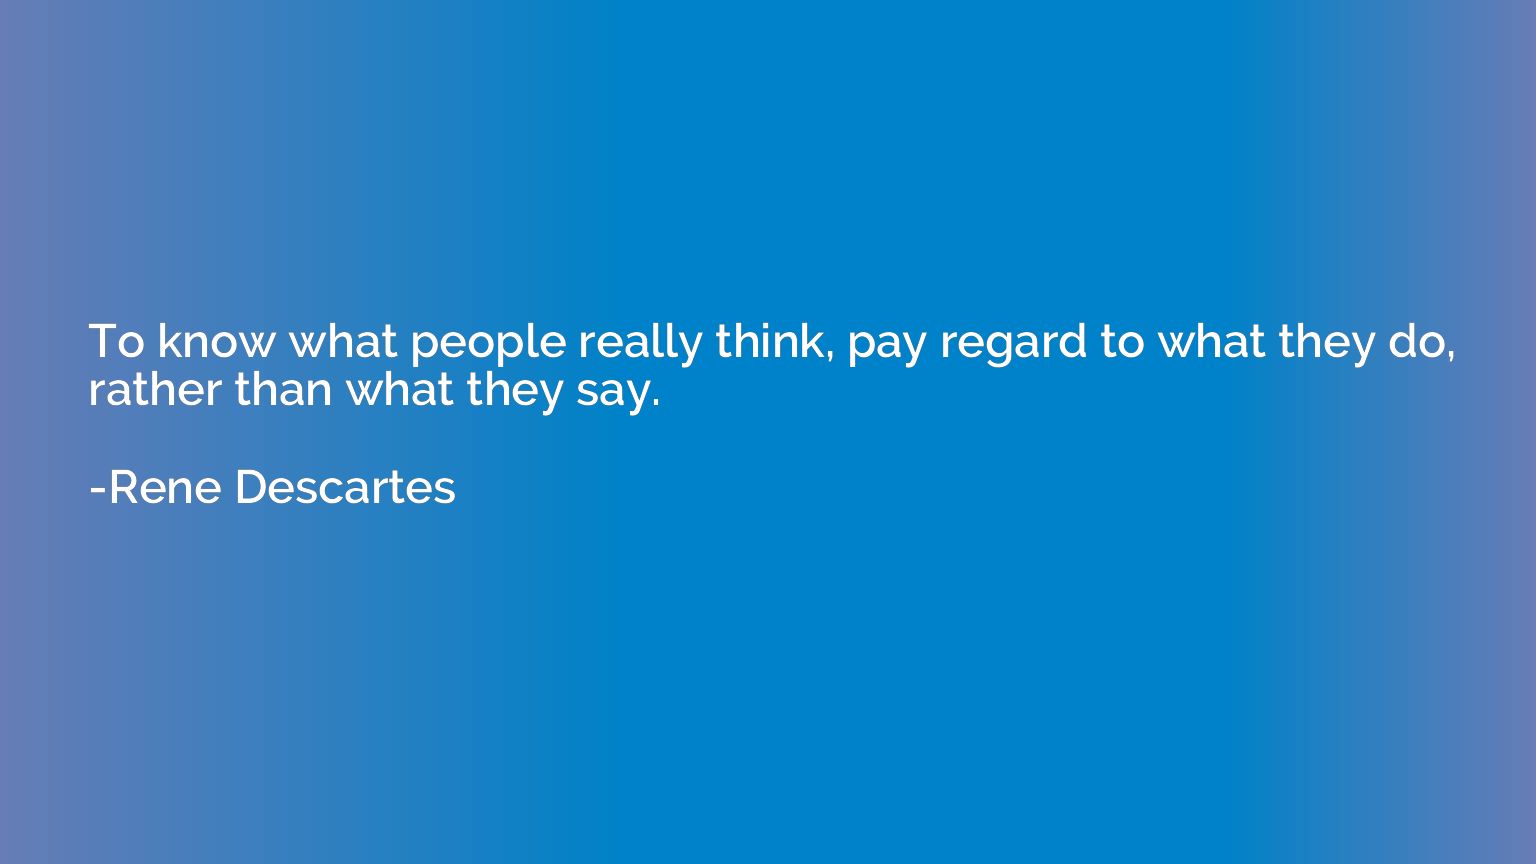 To know what people really think, pay regard to what they do